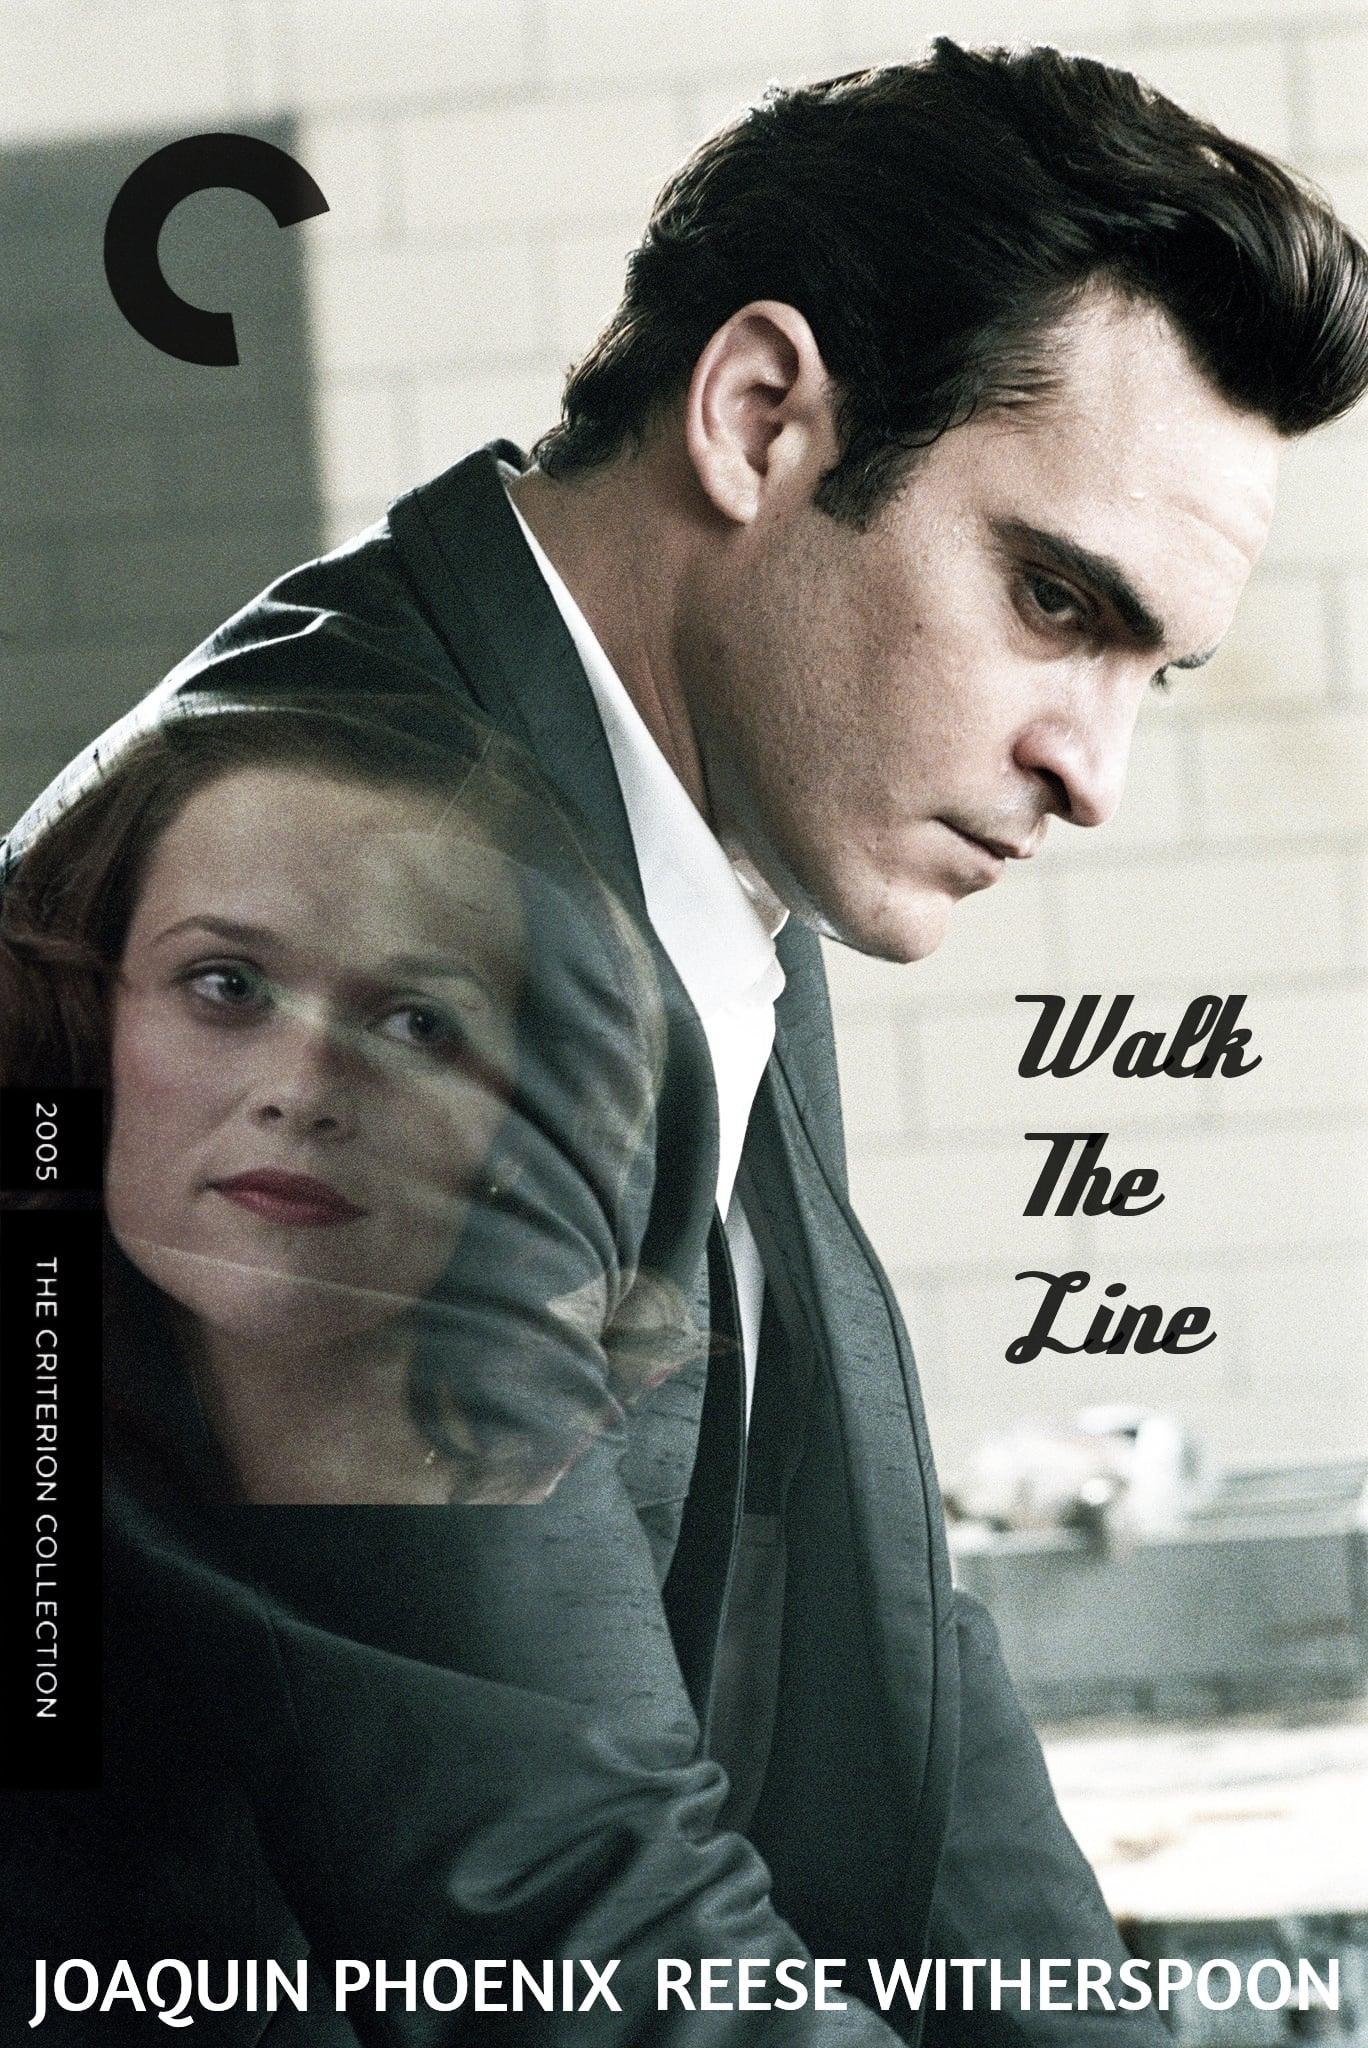 Walk the Line poster